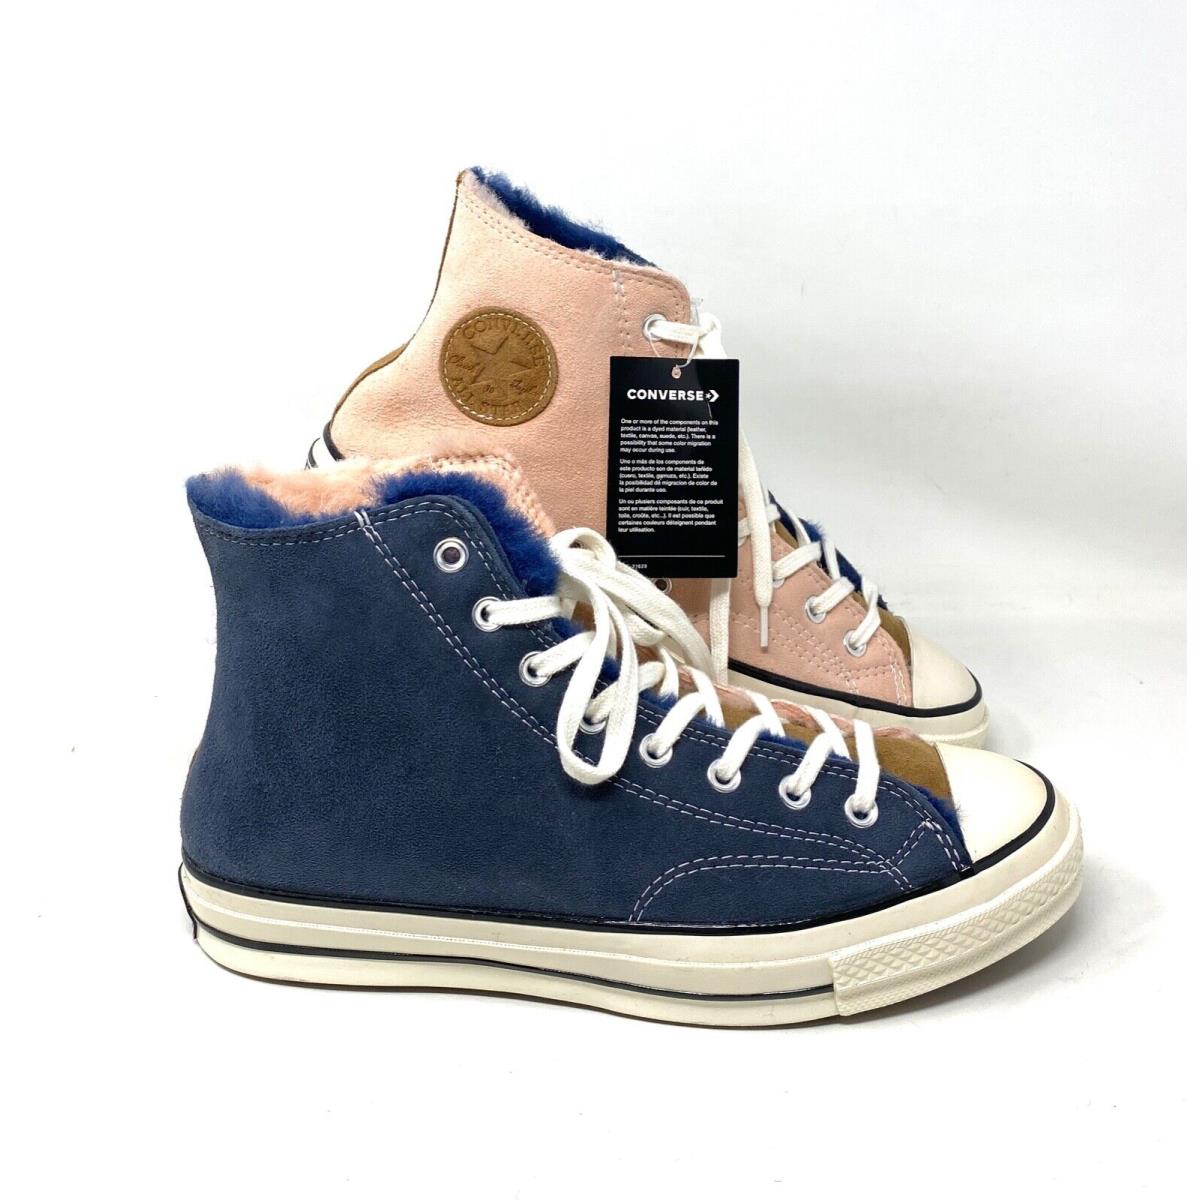 Converse Chuck 70 Shoes High Top Suede Fur Pink Navy Men s Size Sneakers 166319C